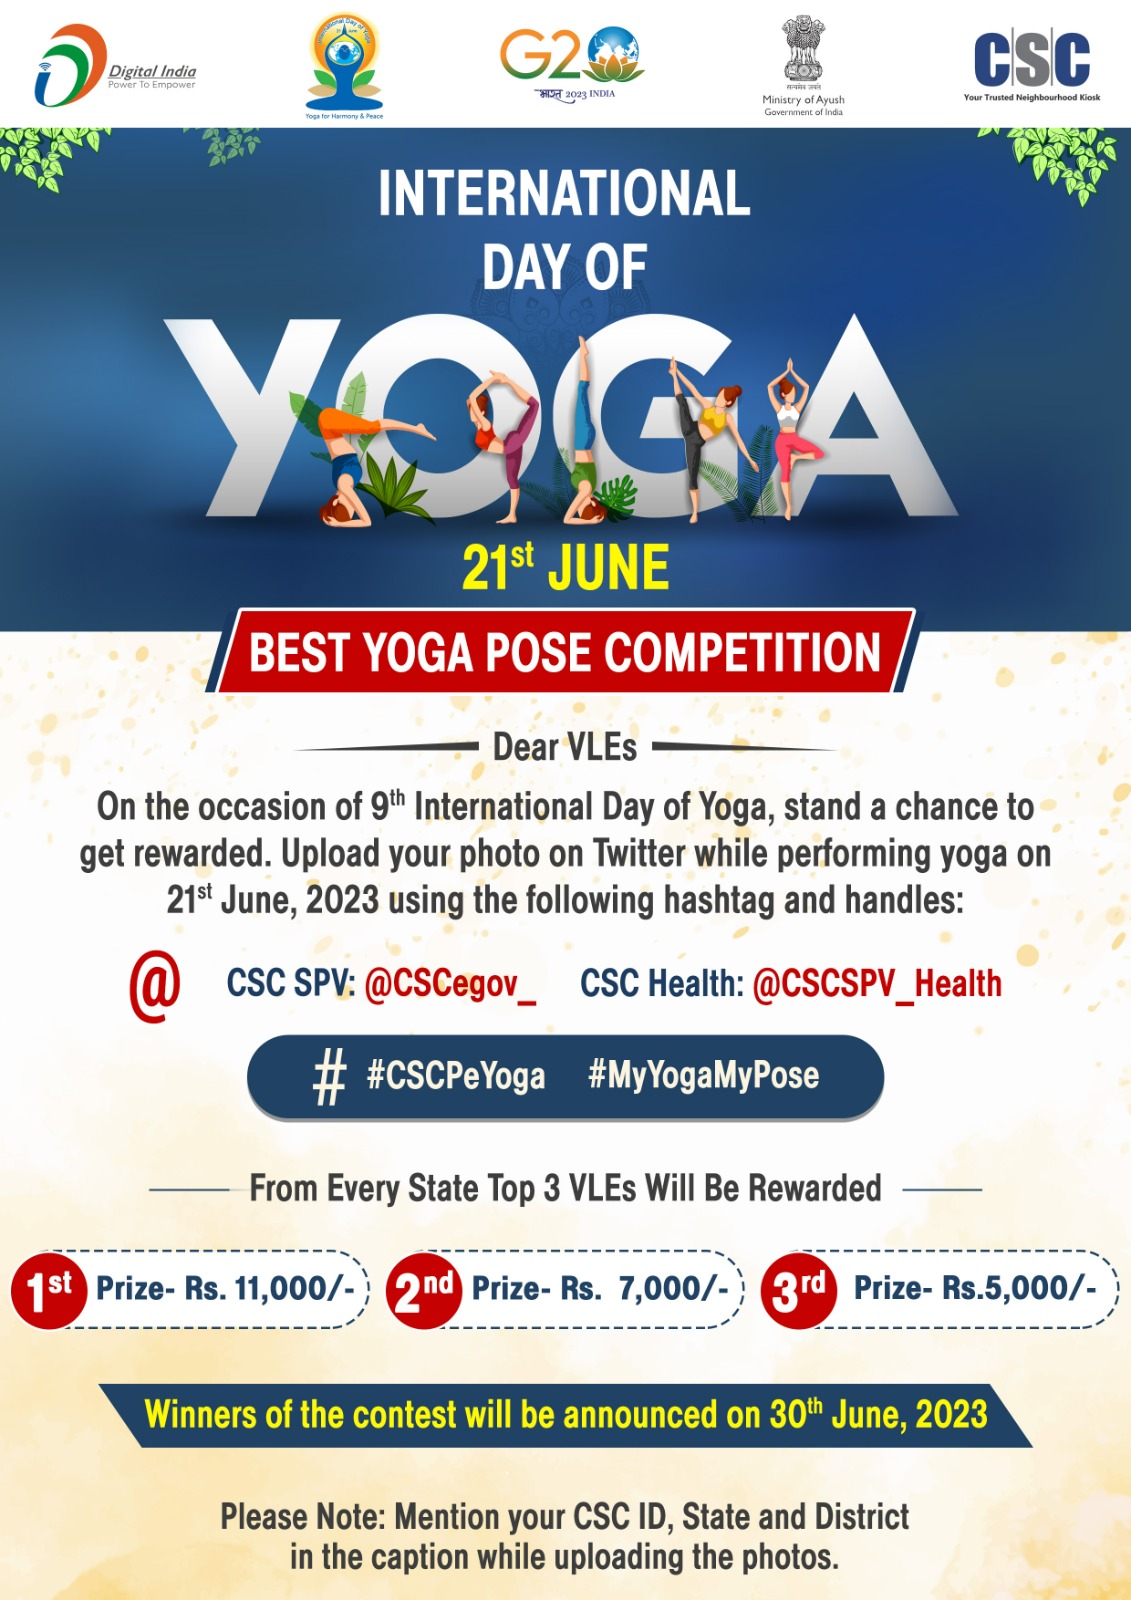 Common Services Centers - 1 DAY TO GO - CSC BEST YOGA POSE COMPETITION...  Dear VLEs, On the occasion of the 8th International Day of Yoga, stand a  chance to get rewarded.